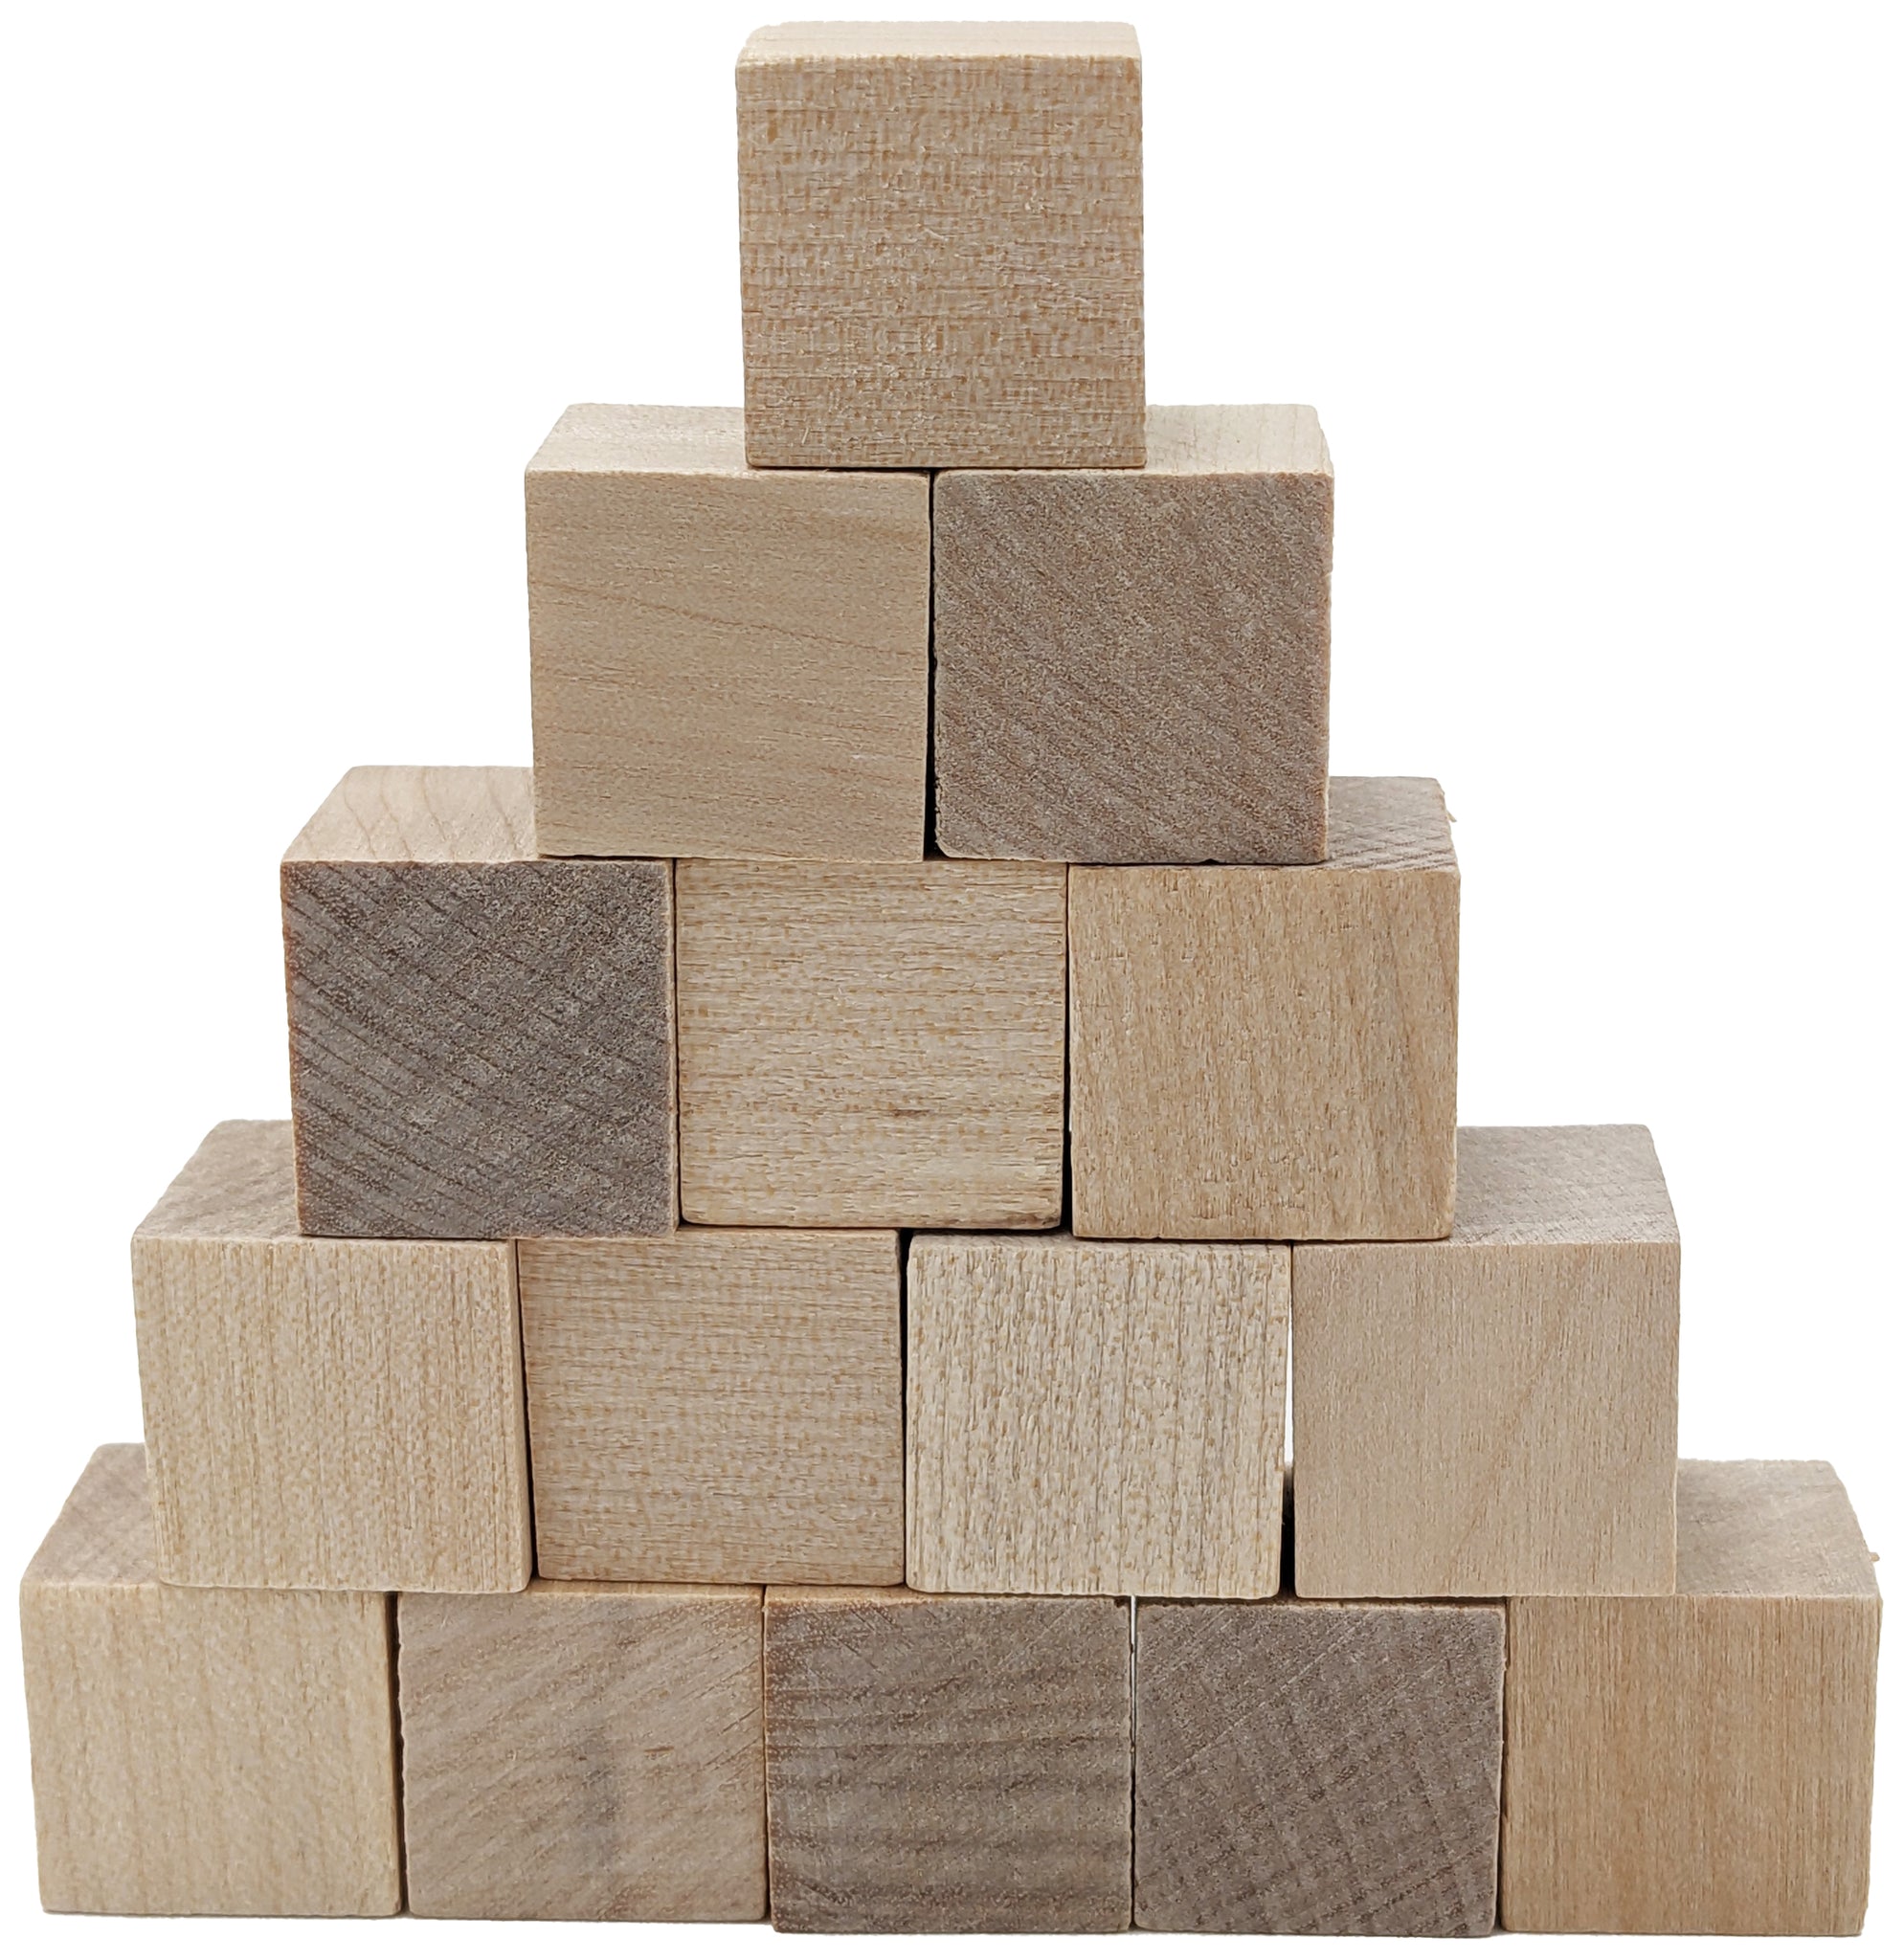 40 Pack Unfinished Birch Wood Blocks, 1.5 inch Natural Wooden Cubes with Smooth Surface for Painting, Arts, Crafts, and Other DIY Projects